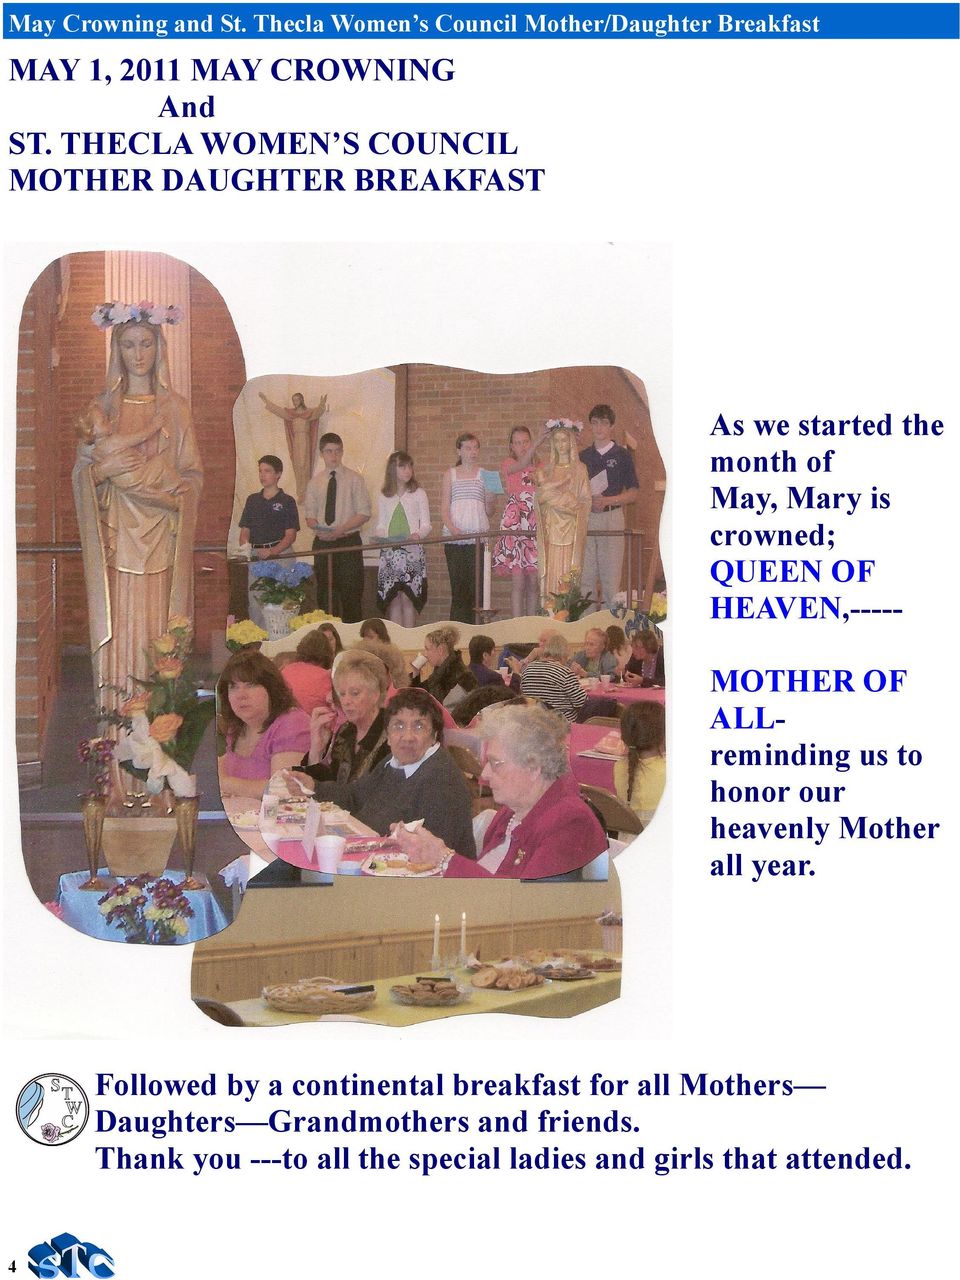 HEAVEN,----- MOTHER OF ALLreminding us to honor our heavenly Mother all year.